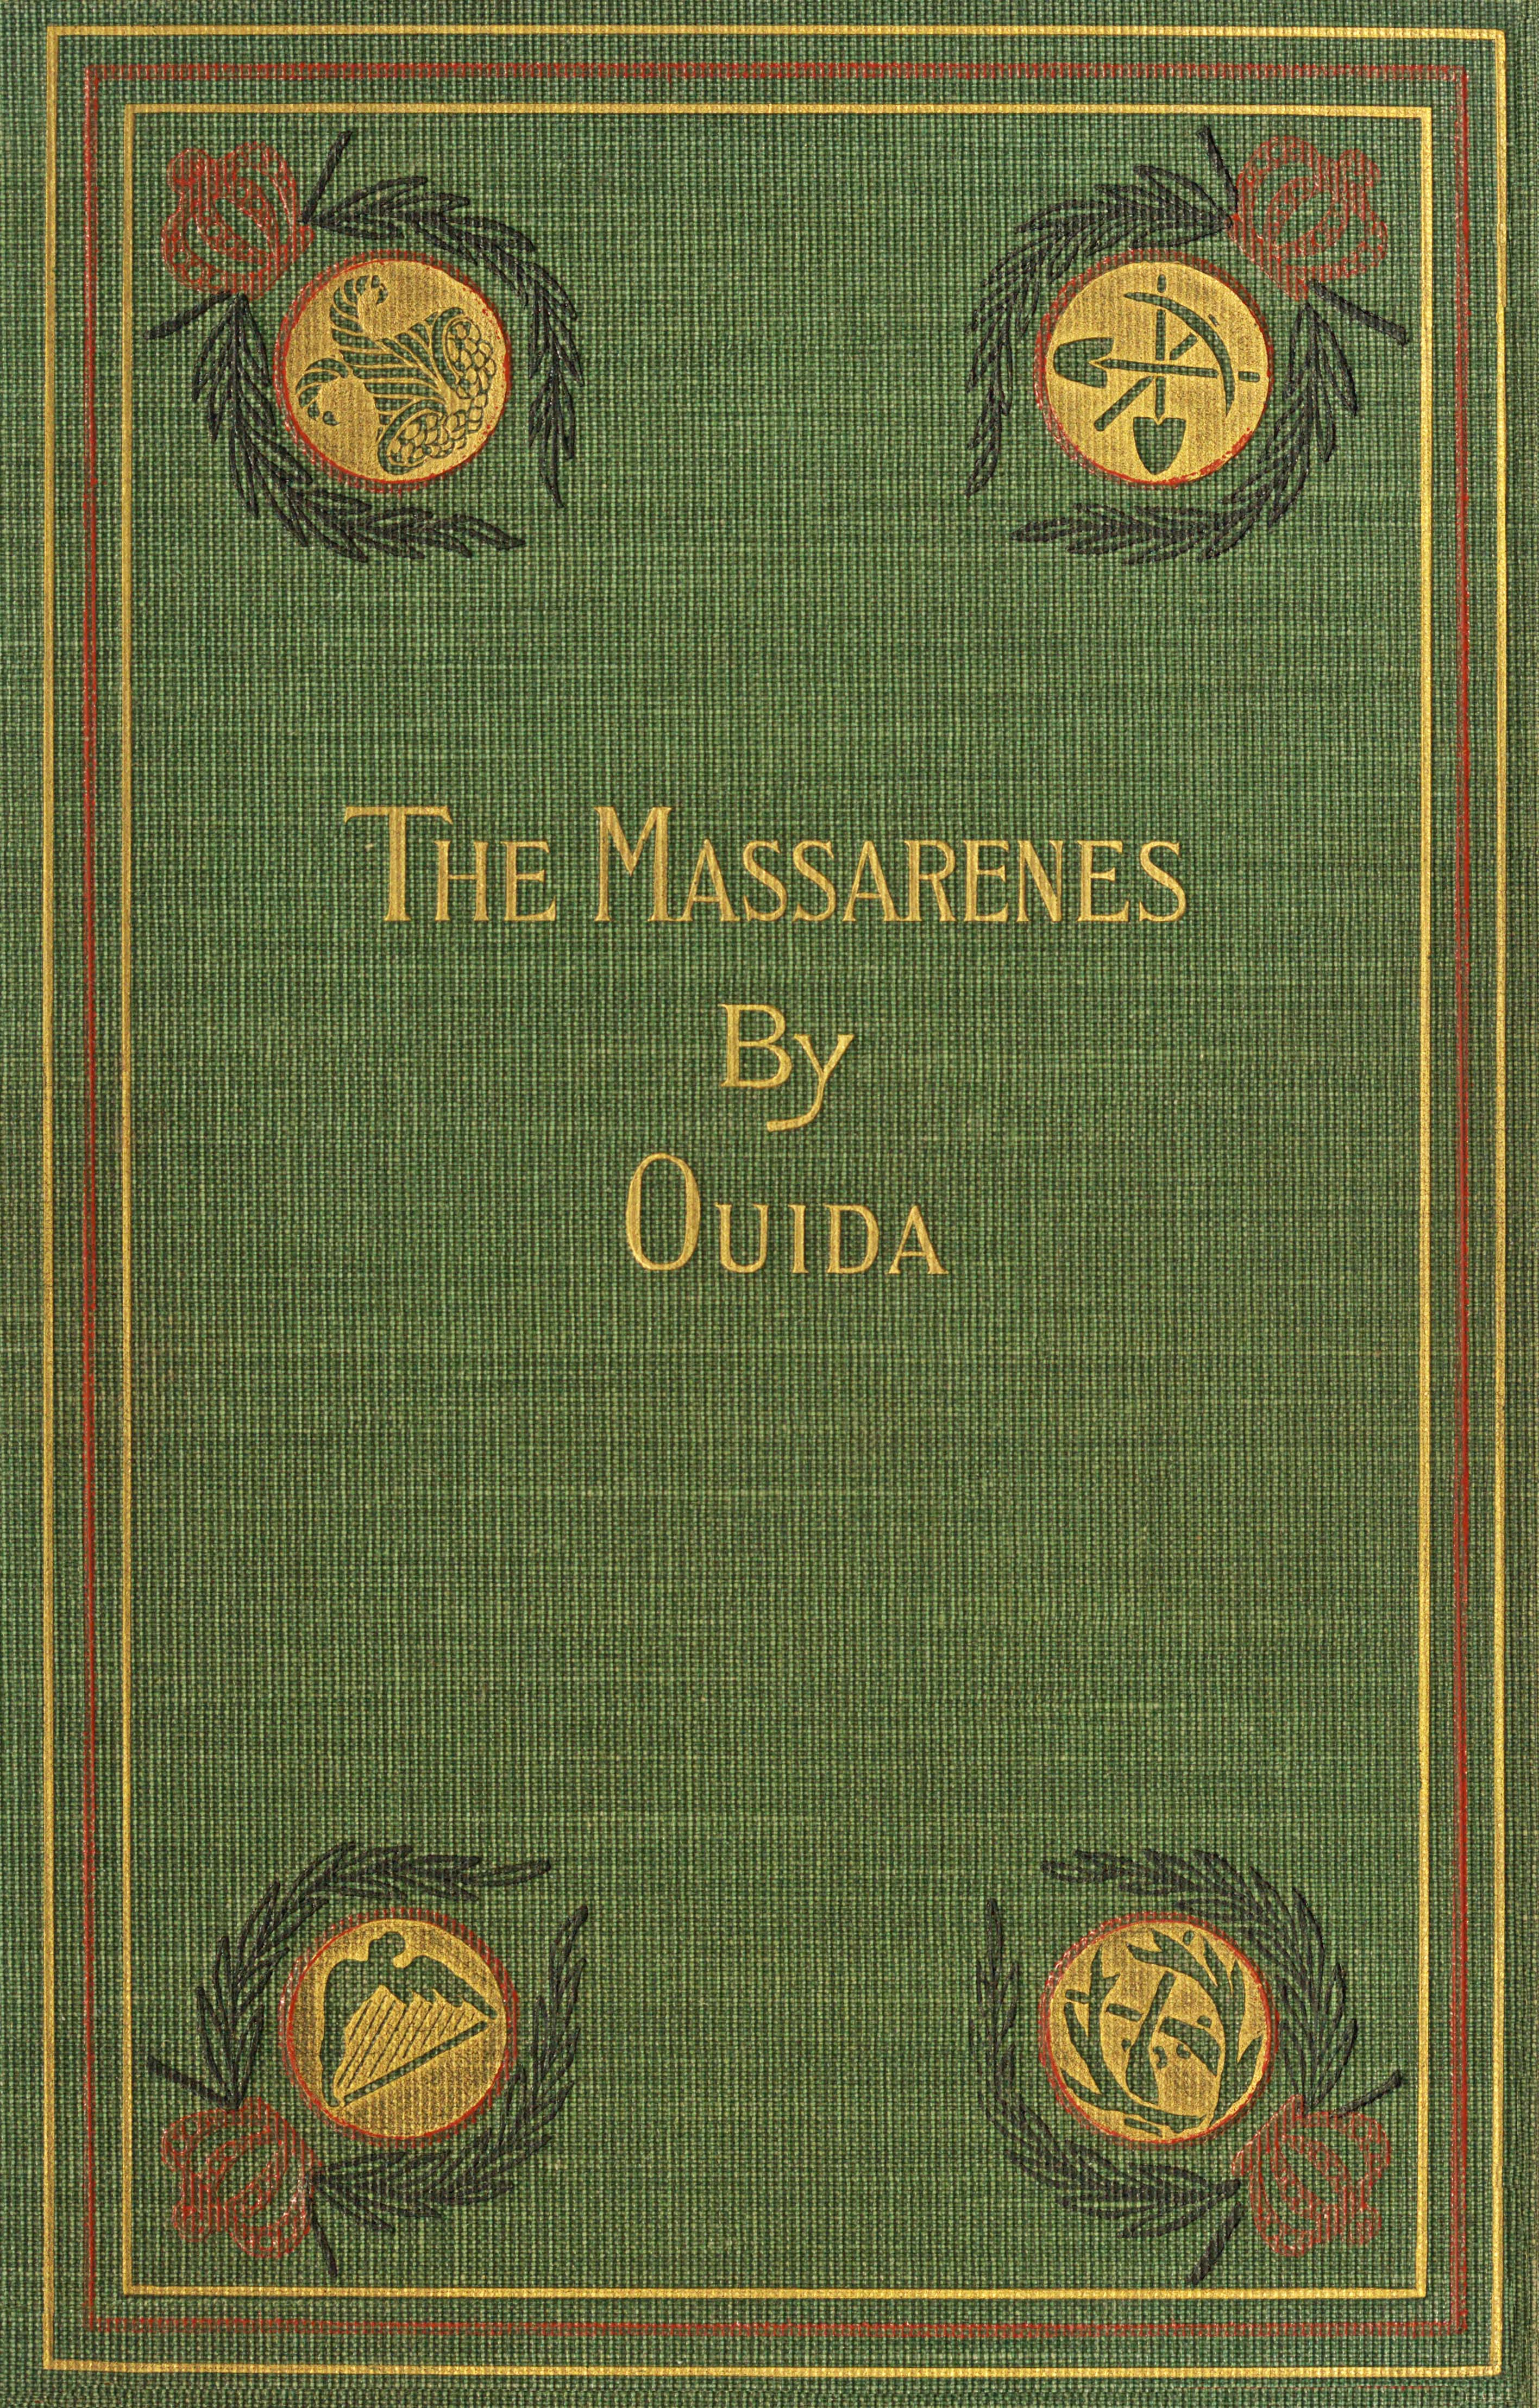 The Massarenes, by Ouida—A Project Gutenberg eBook pic